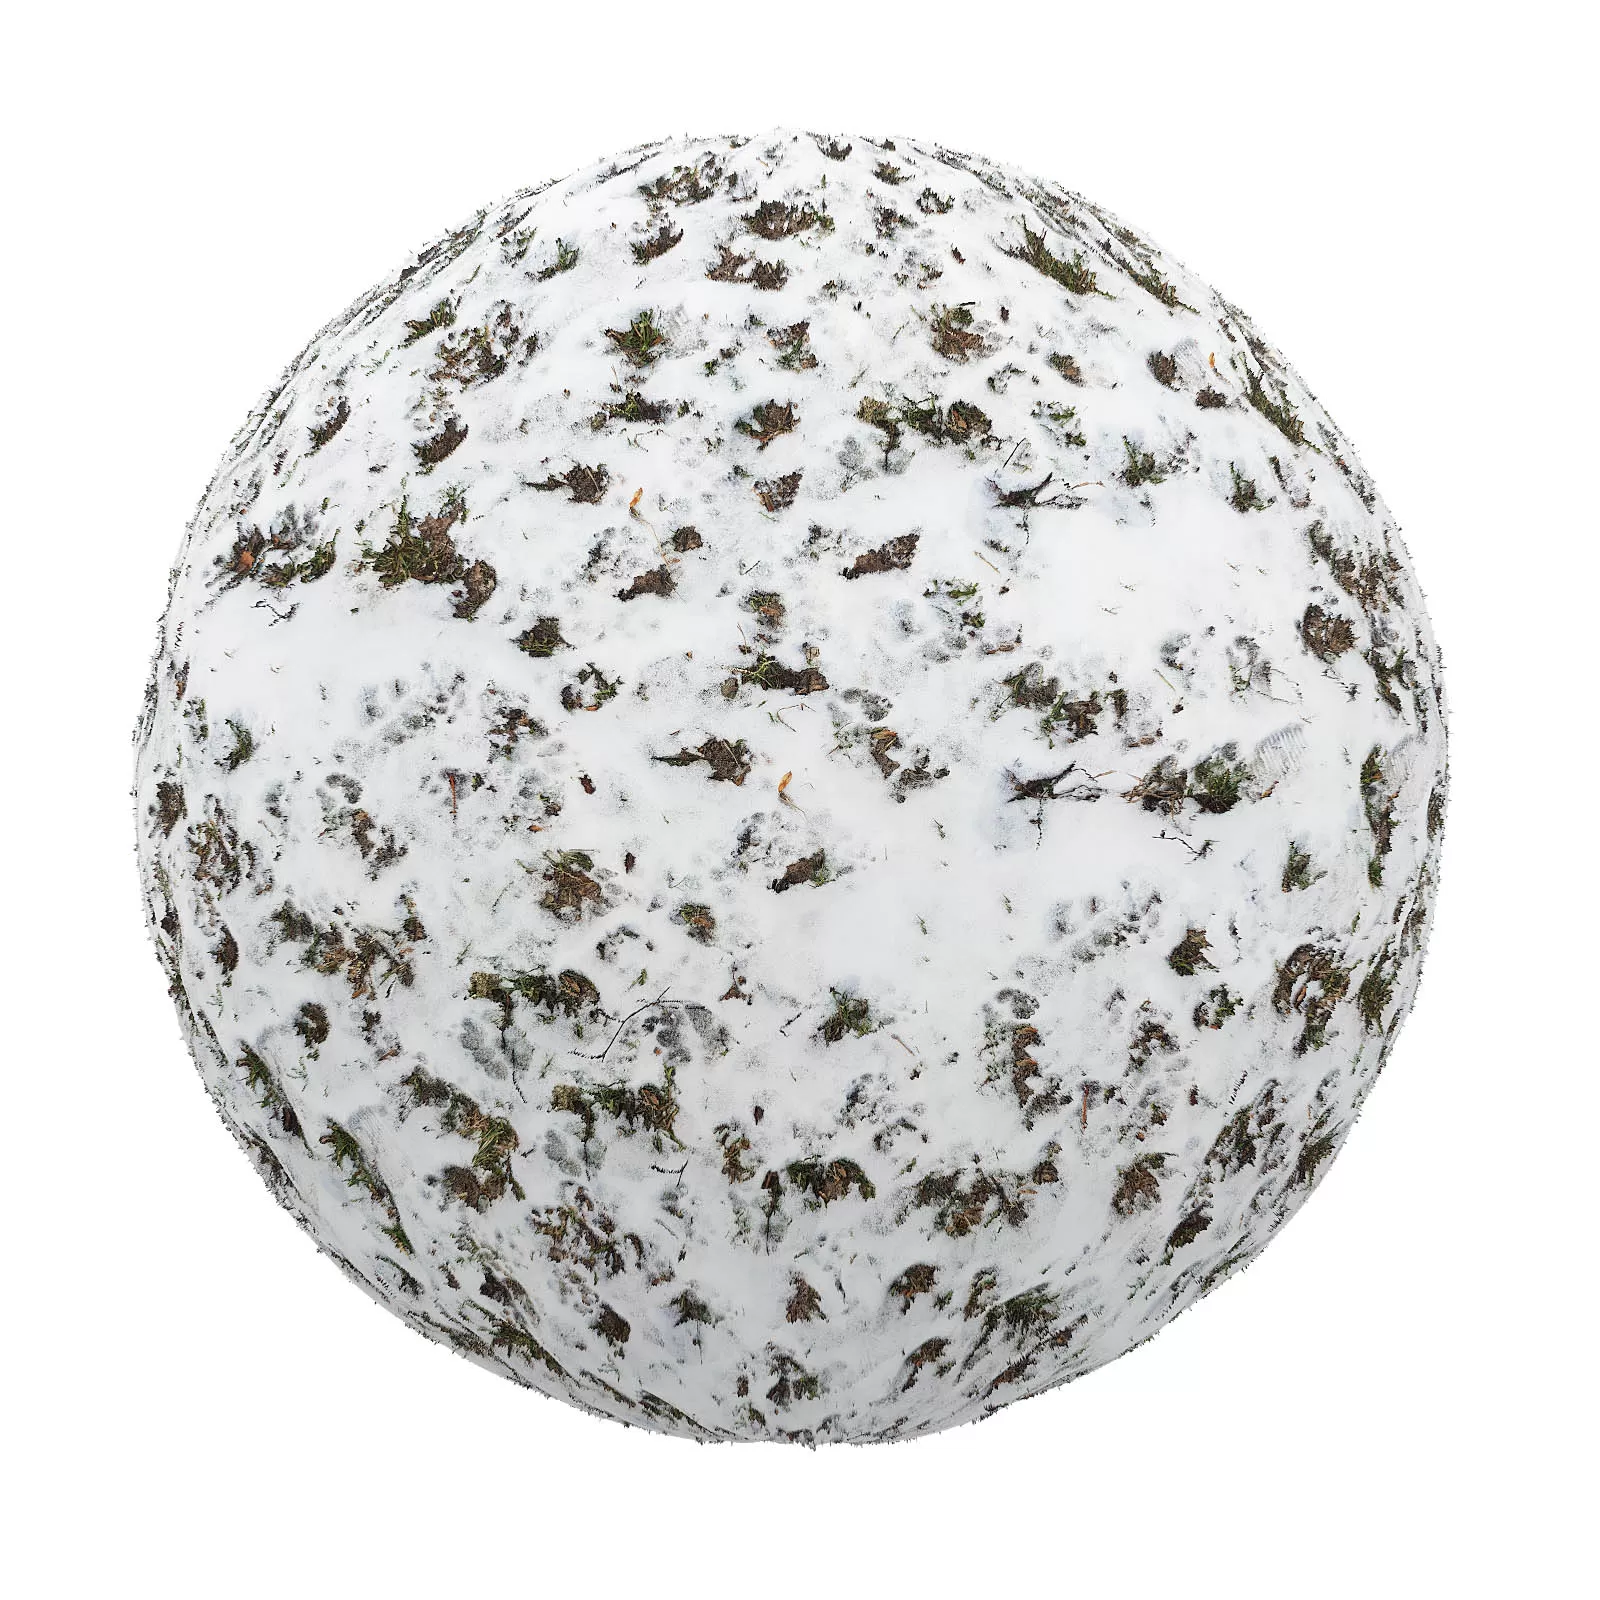 PBR CGAXIS TEXTURES – SNOW – Snow Covering Grass And Dirt 4